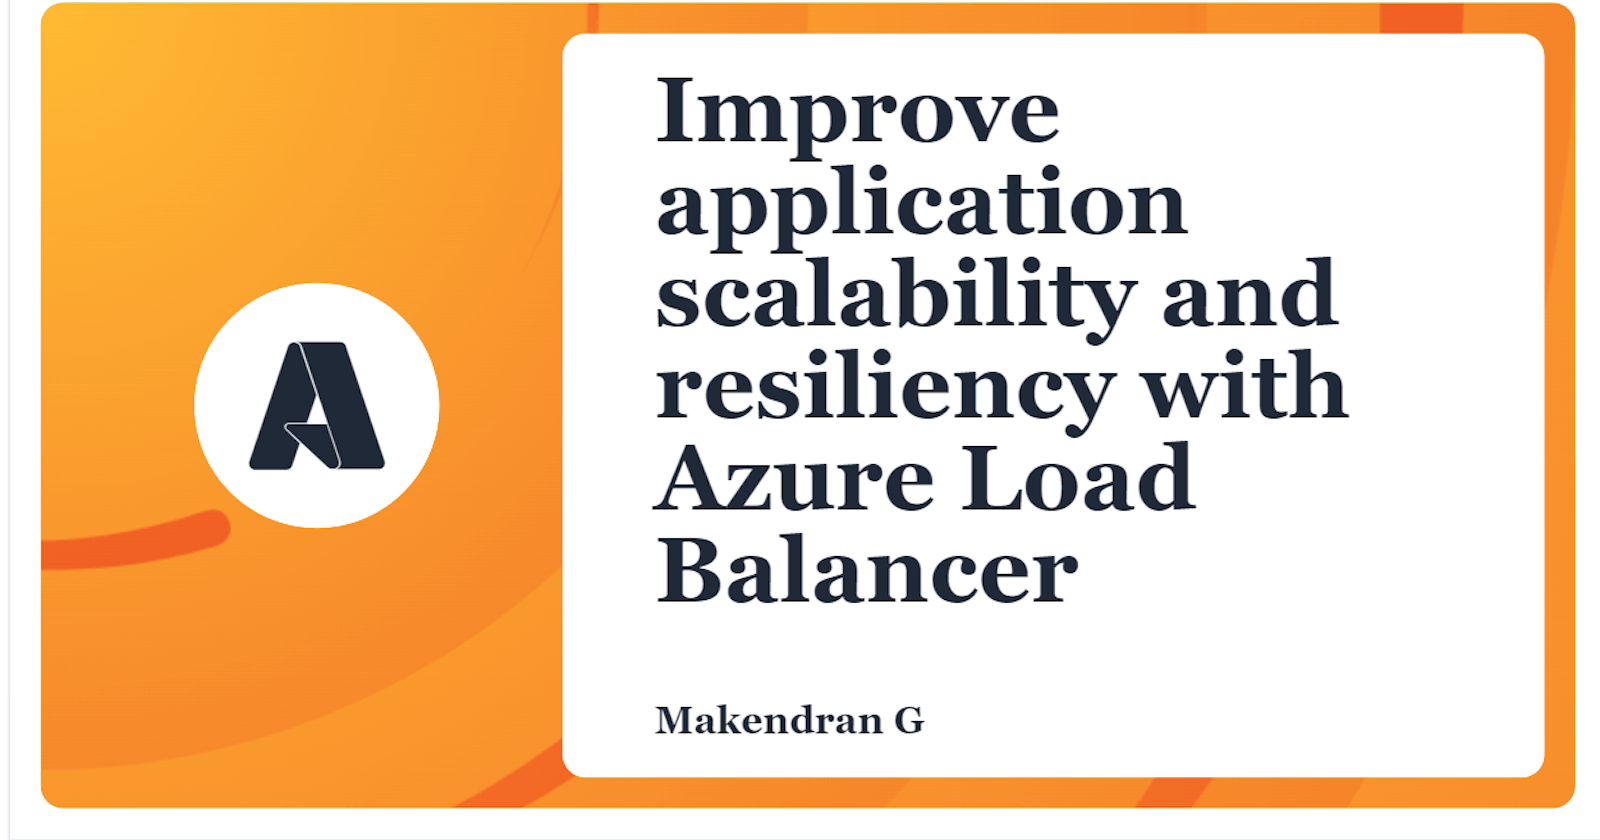 Improve application scalability and resiliency with Azure Load Balancer